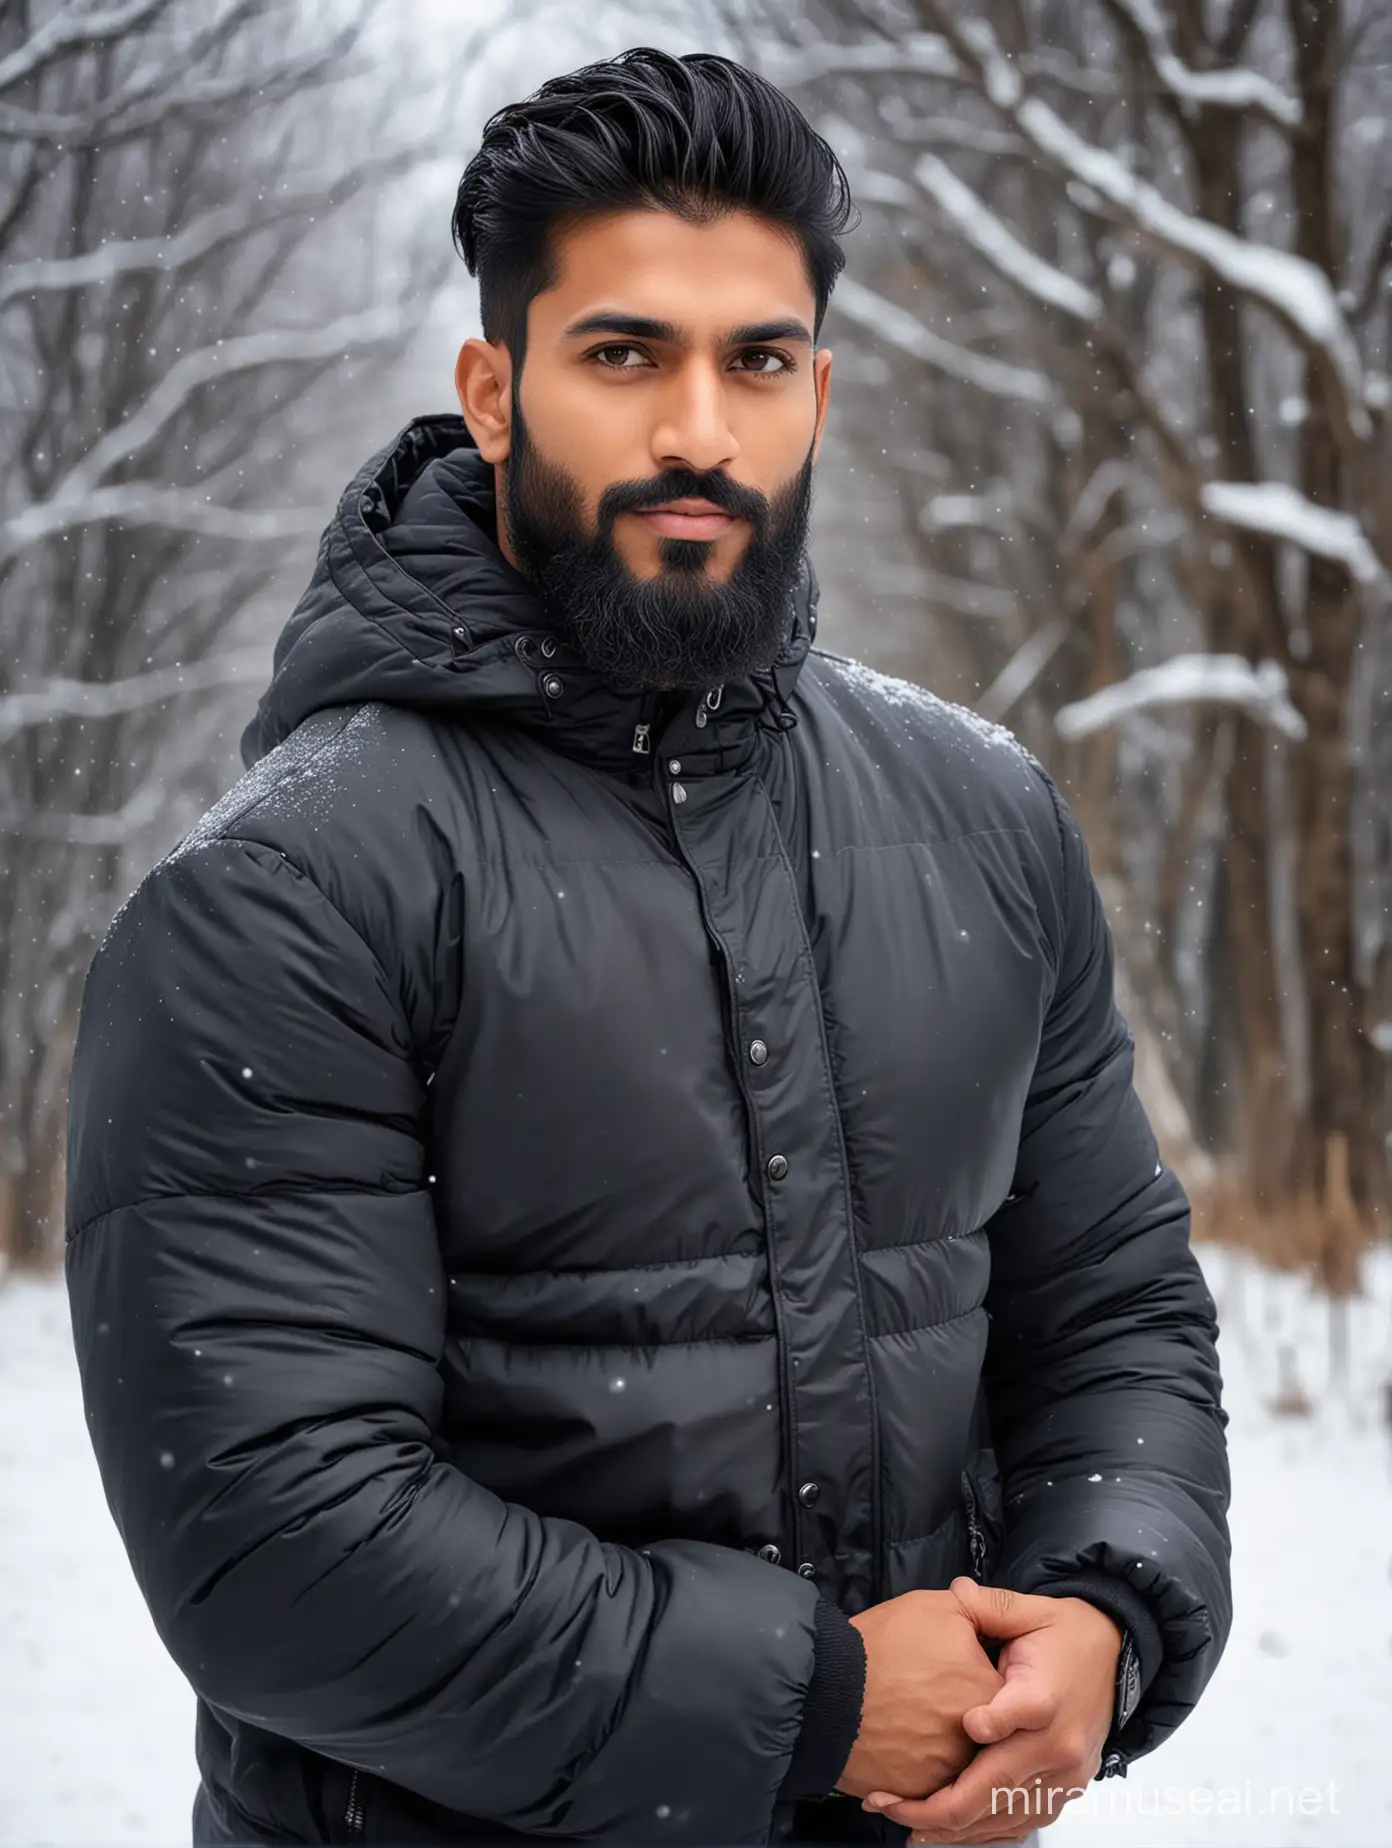 Tall and handsome muscular Indian men with beautiful hairstyle and beard and Big wide shoulder in black puff jacket in snowy background 